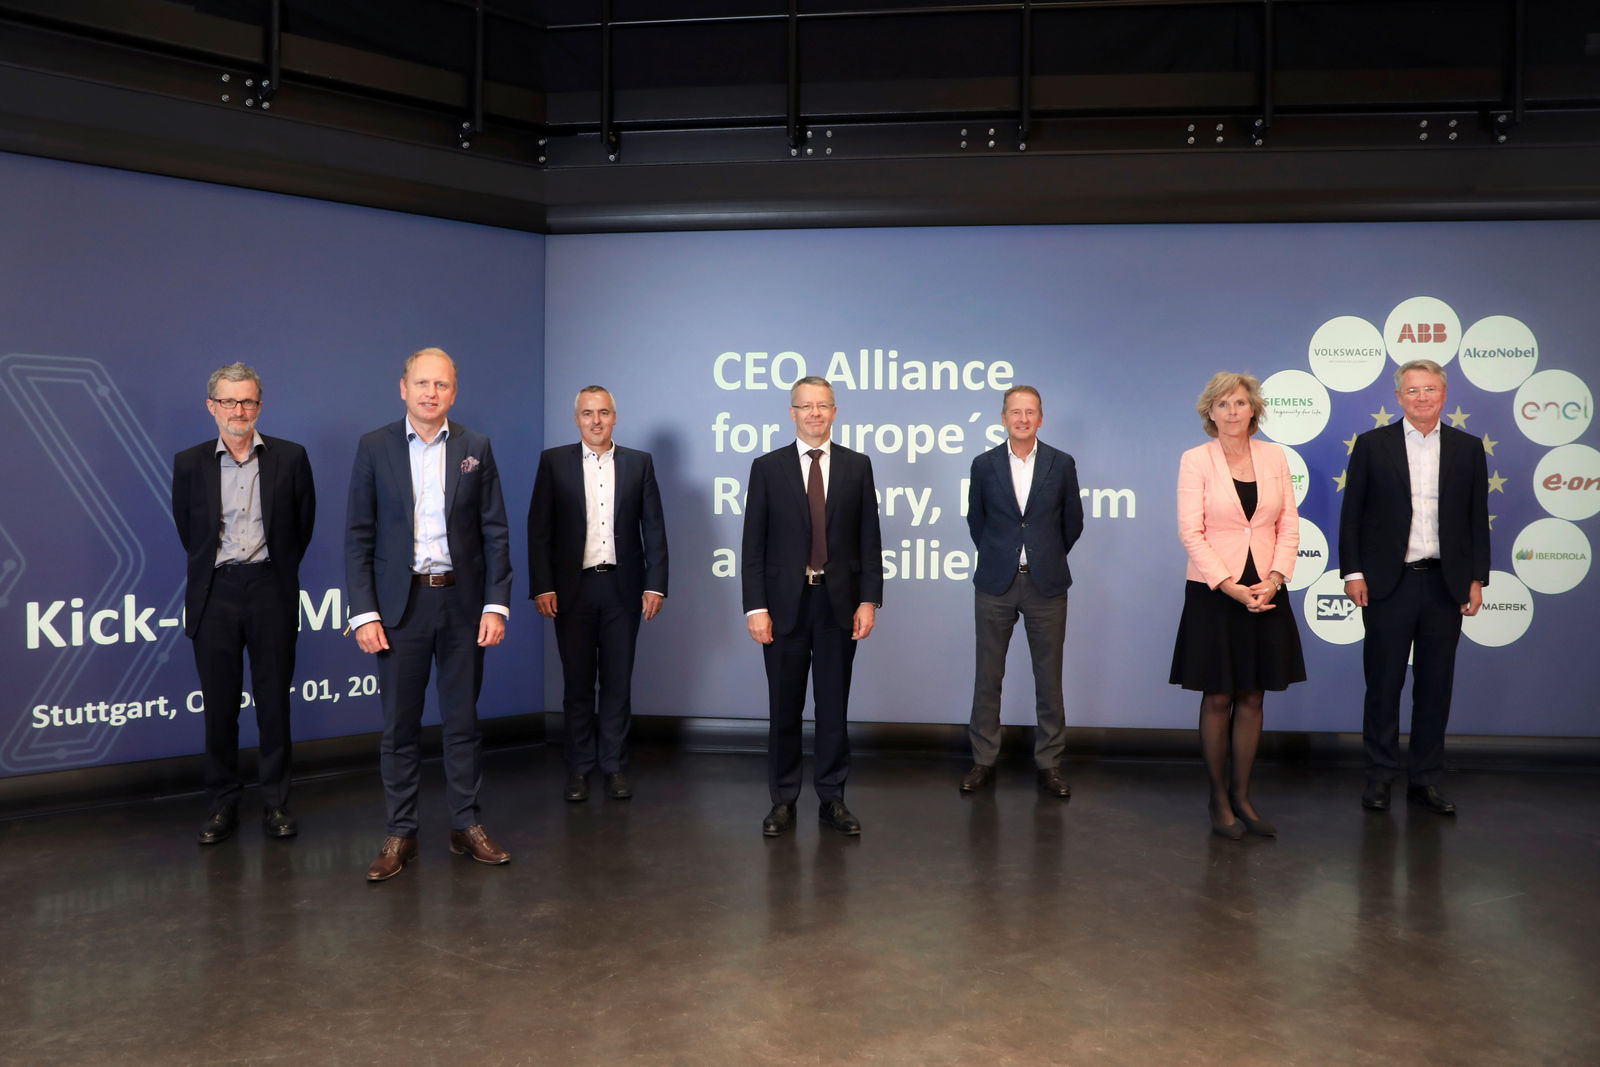 European CEO Alliance emphasizes cross-industry collaboration to fight climate change